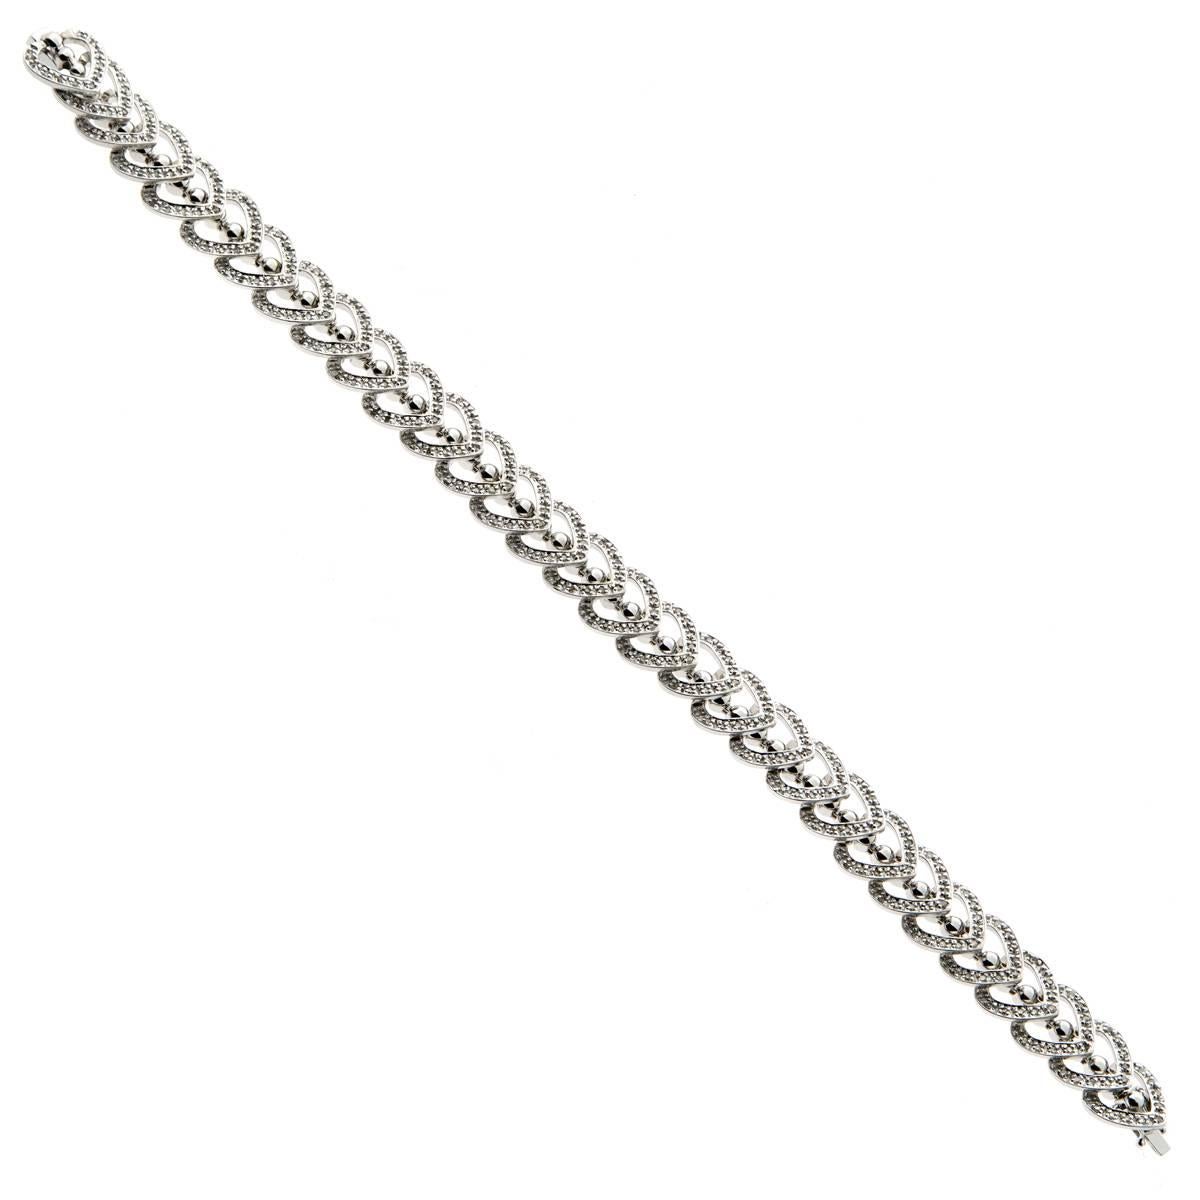 A fabulous bracelet featuring round brilliant cut diamonds set in 14k white gold, this fun bracelet features a free flowing design which is sure to grab attention!

The bracelet measures 7.5